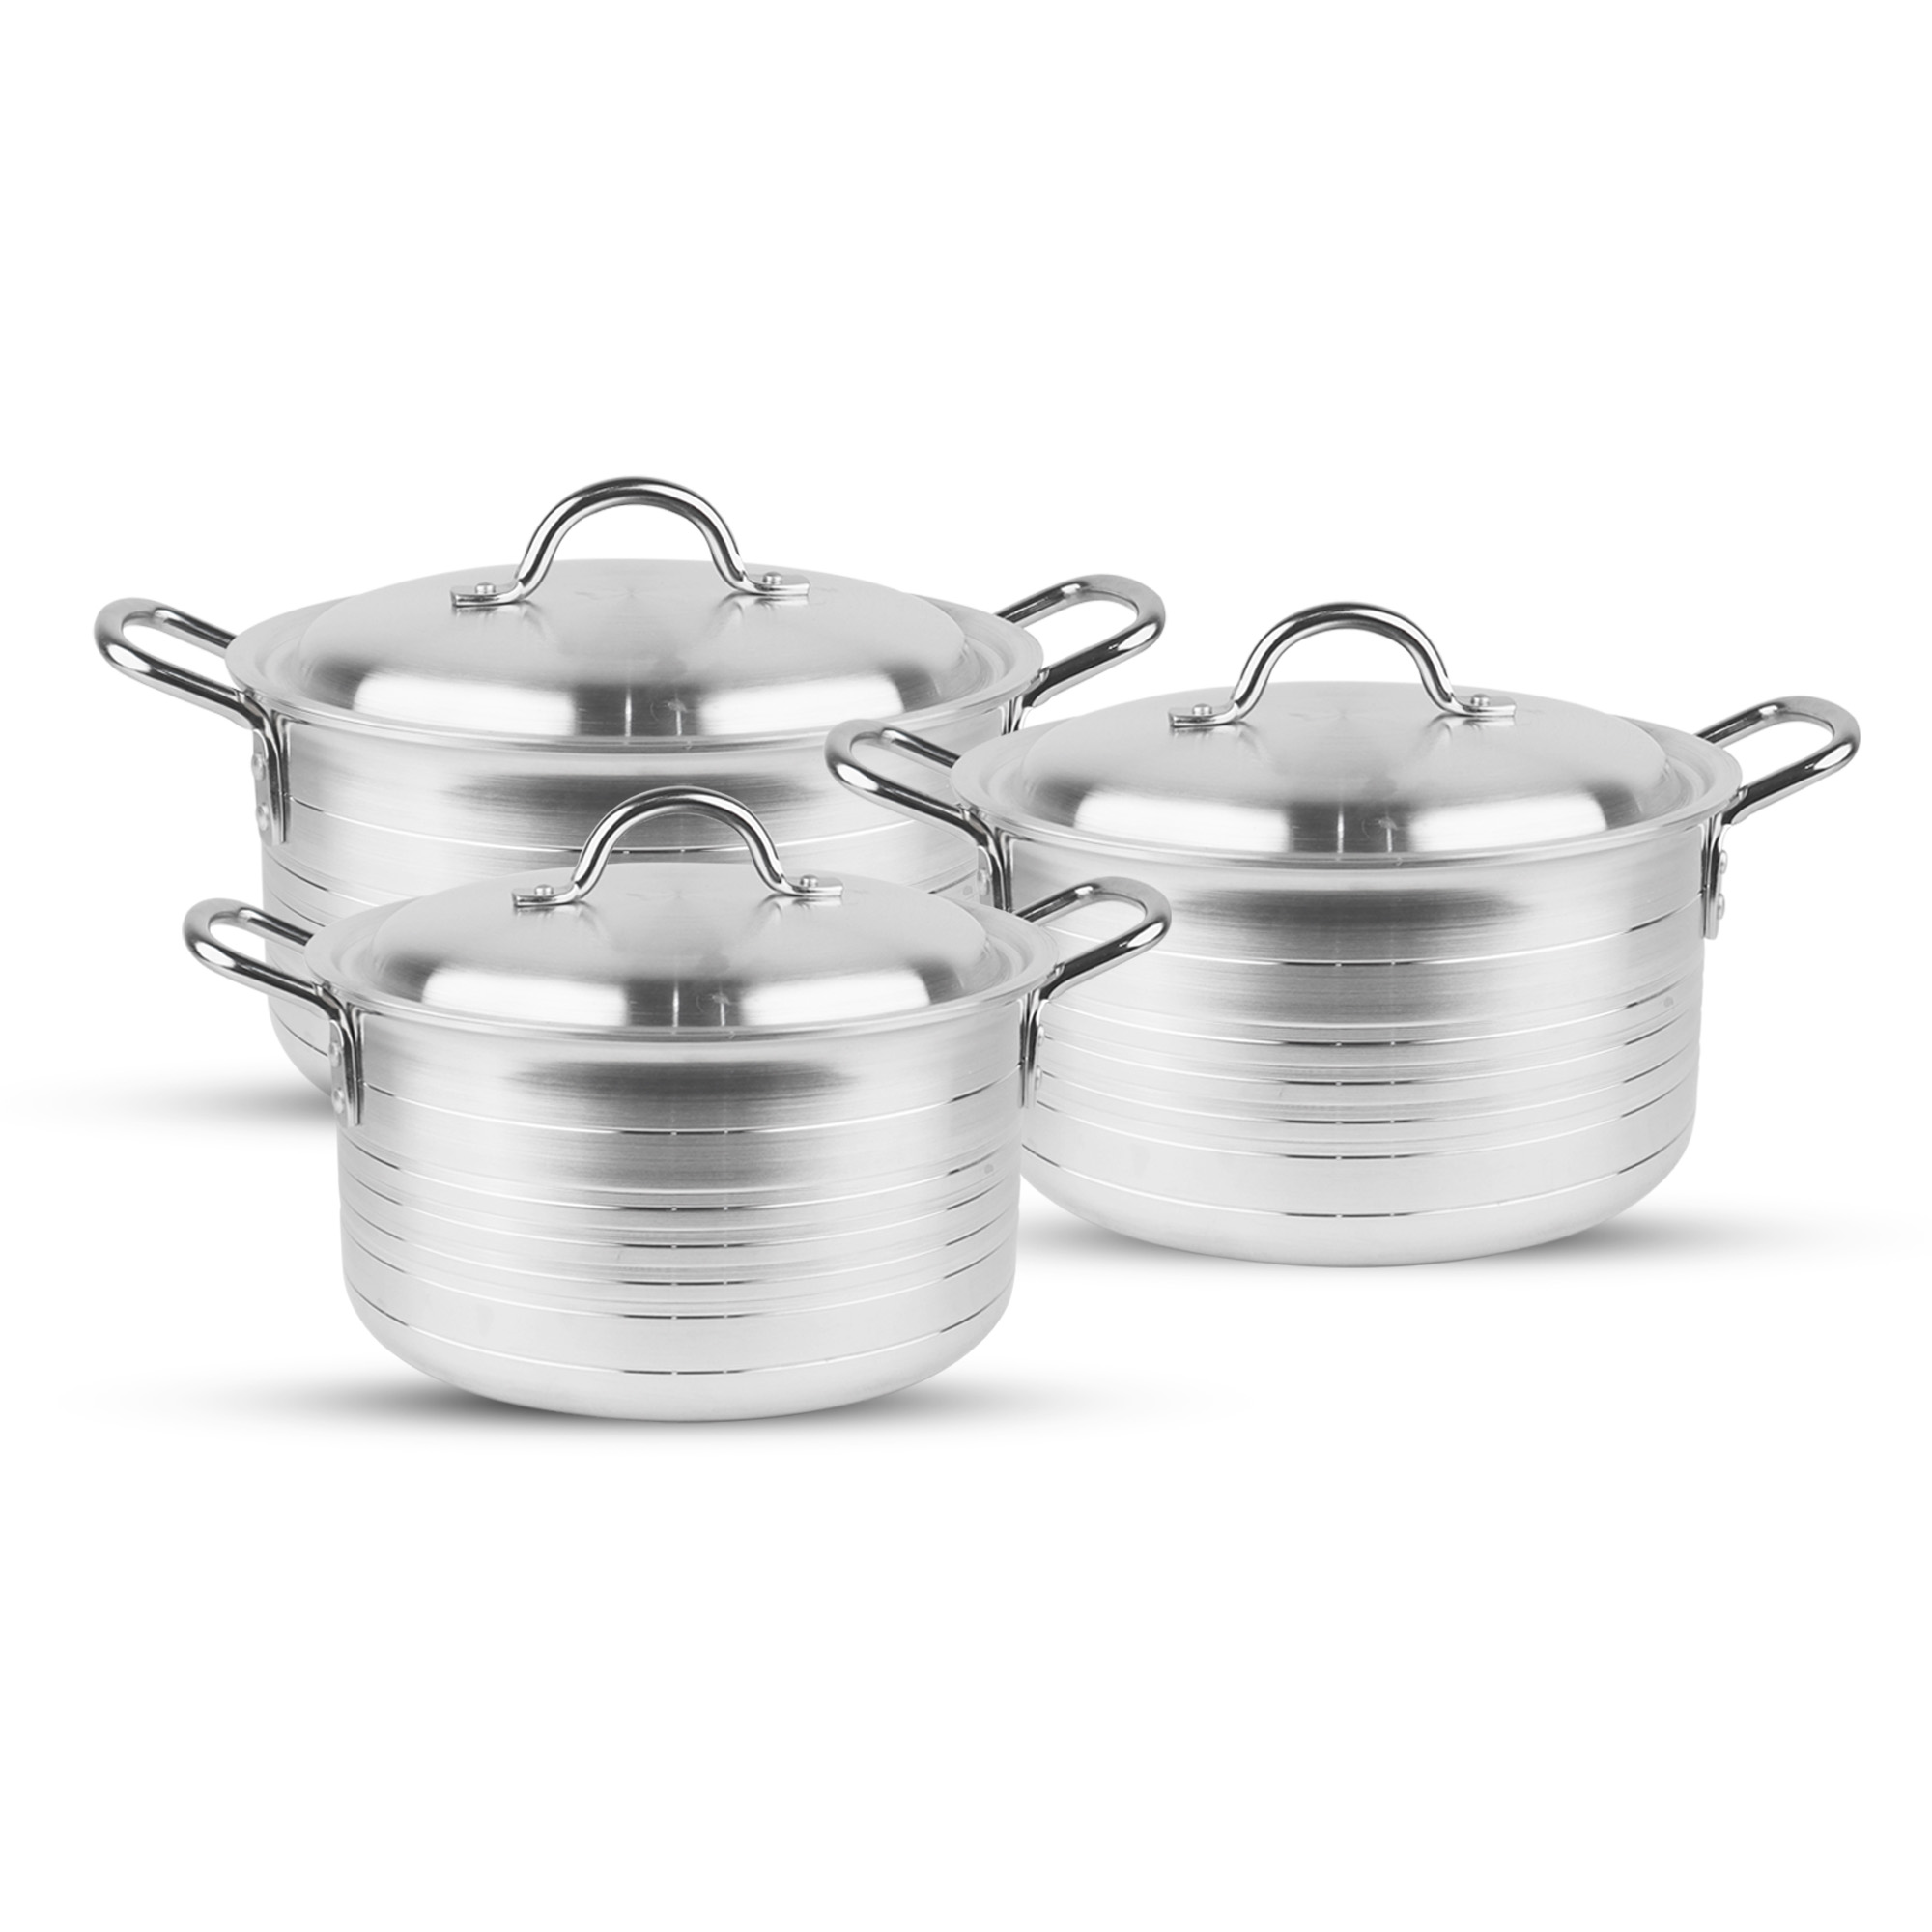 majestic chef best quality aluminum cookware cooking pots cooking pans heavy guage new look groovy set at best price in pakistan